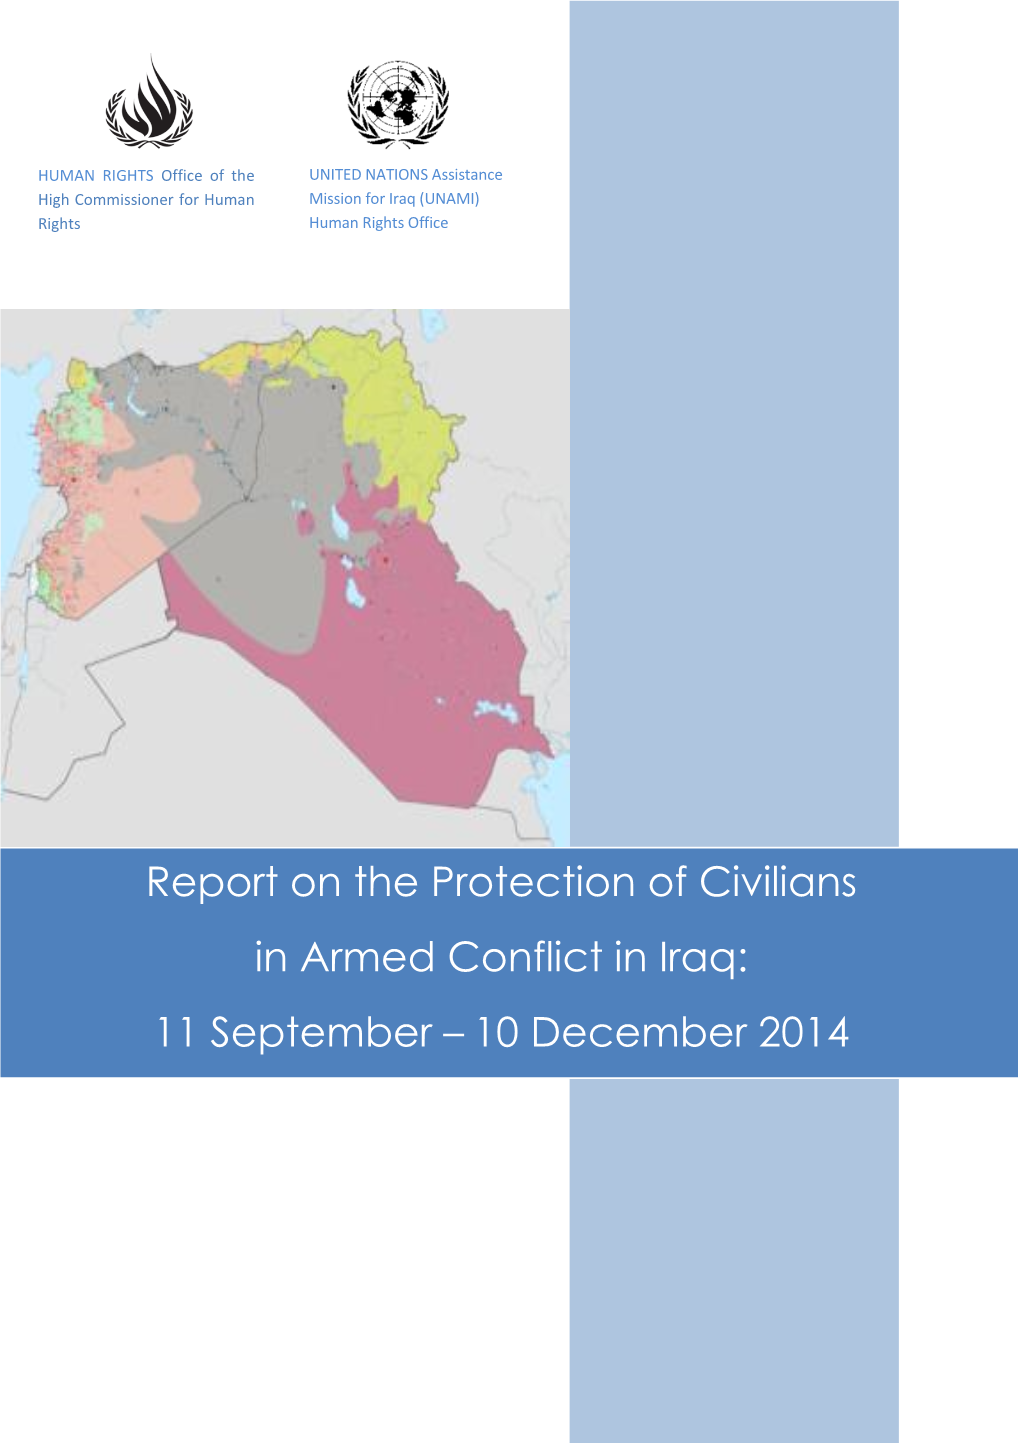 Report on the Protection of Civilians in Armed Conflict in Iraq